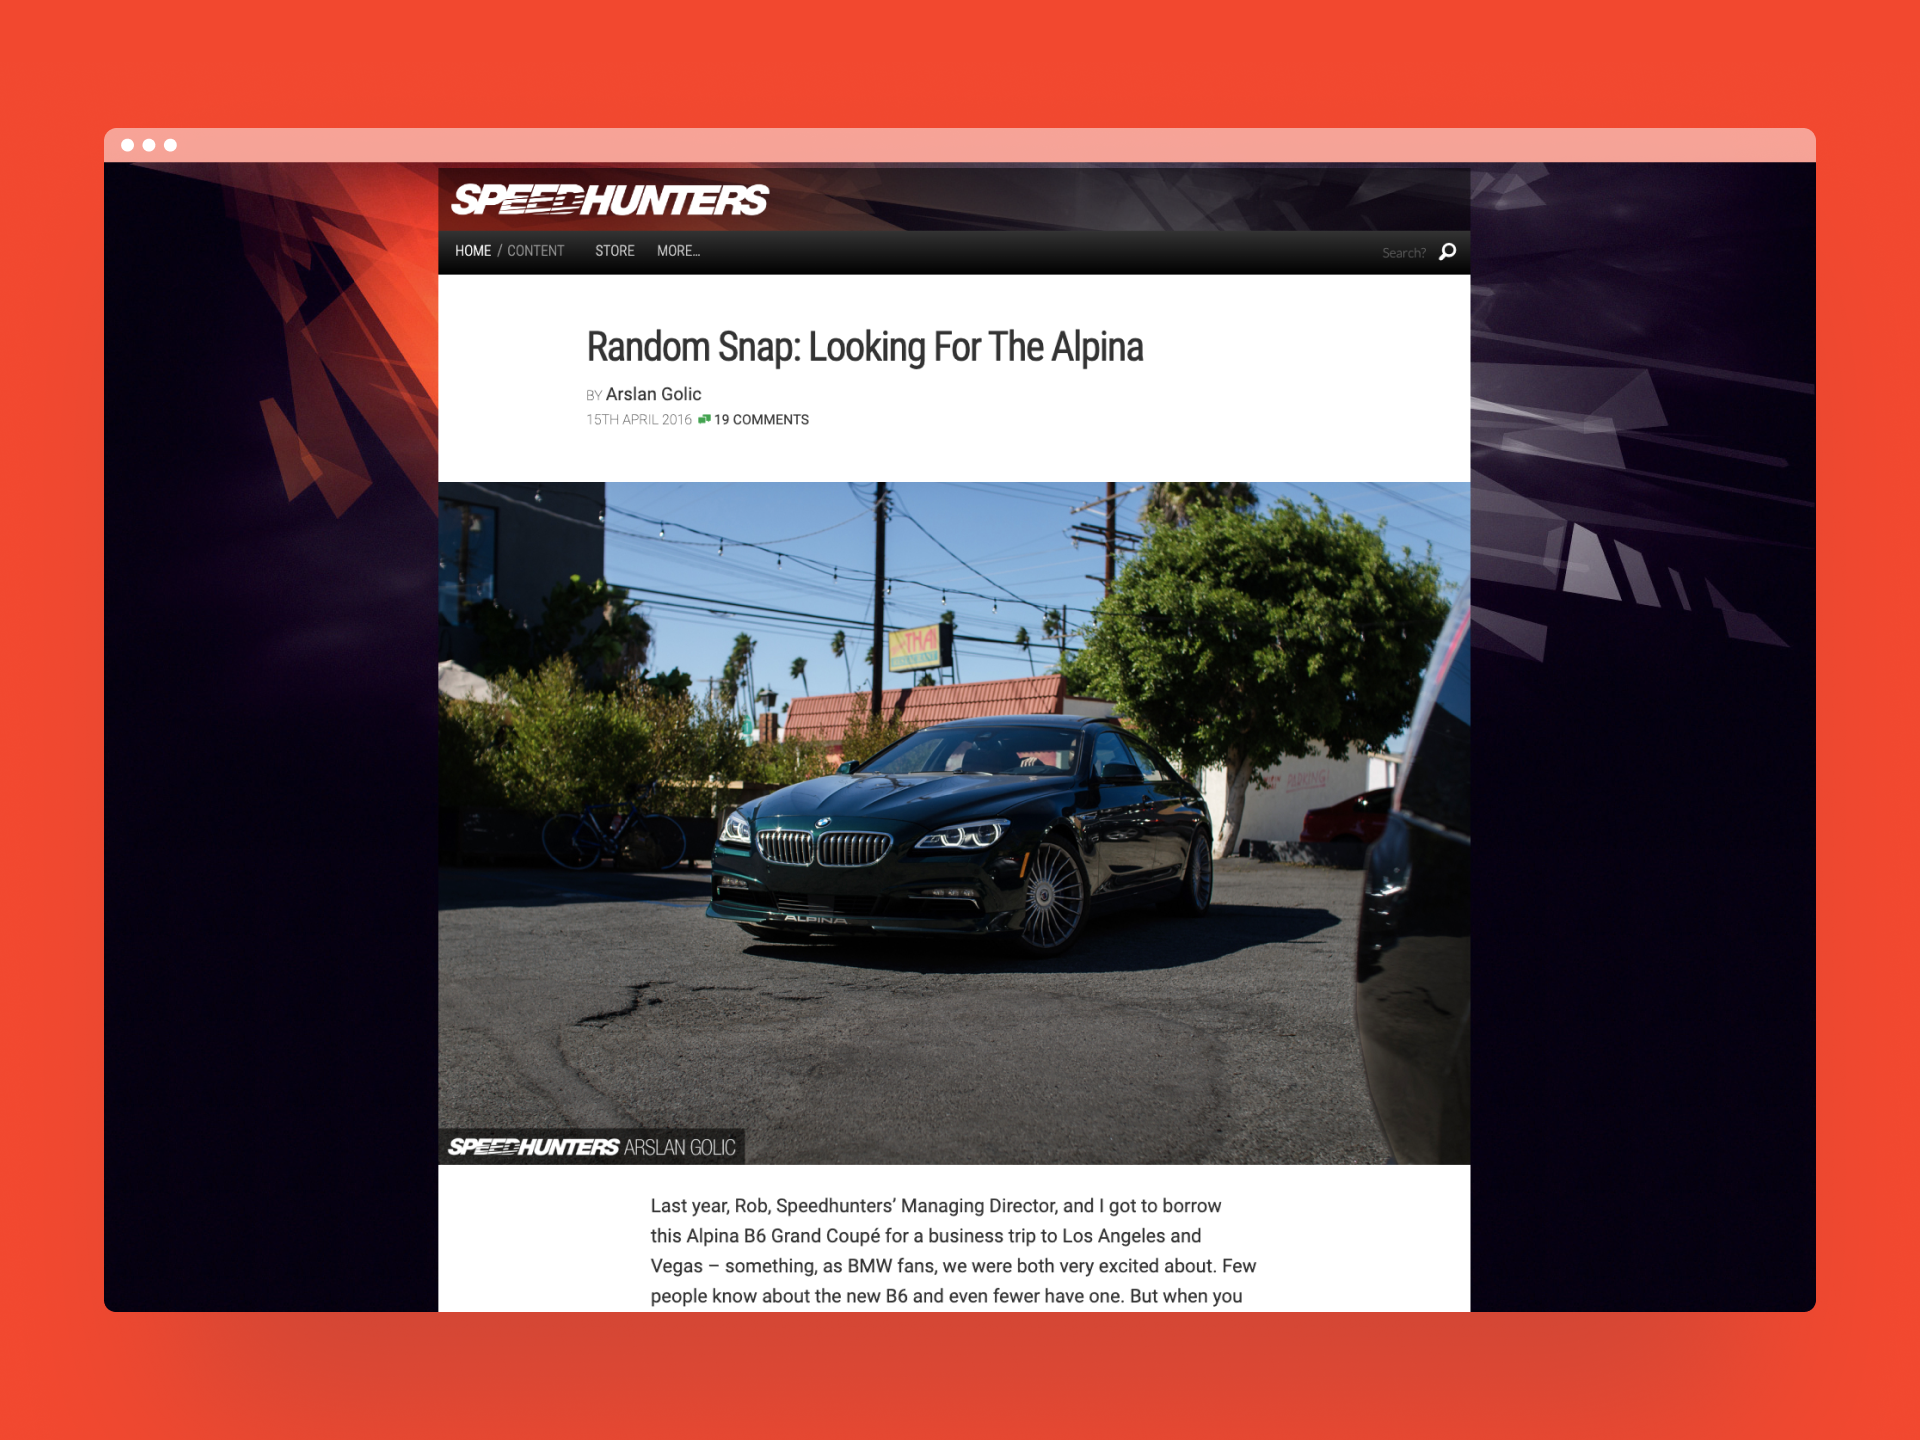 Article page for Speedhunters.